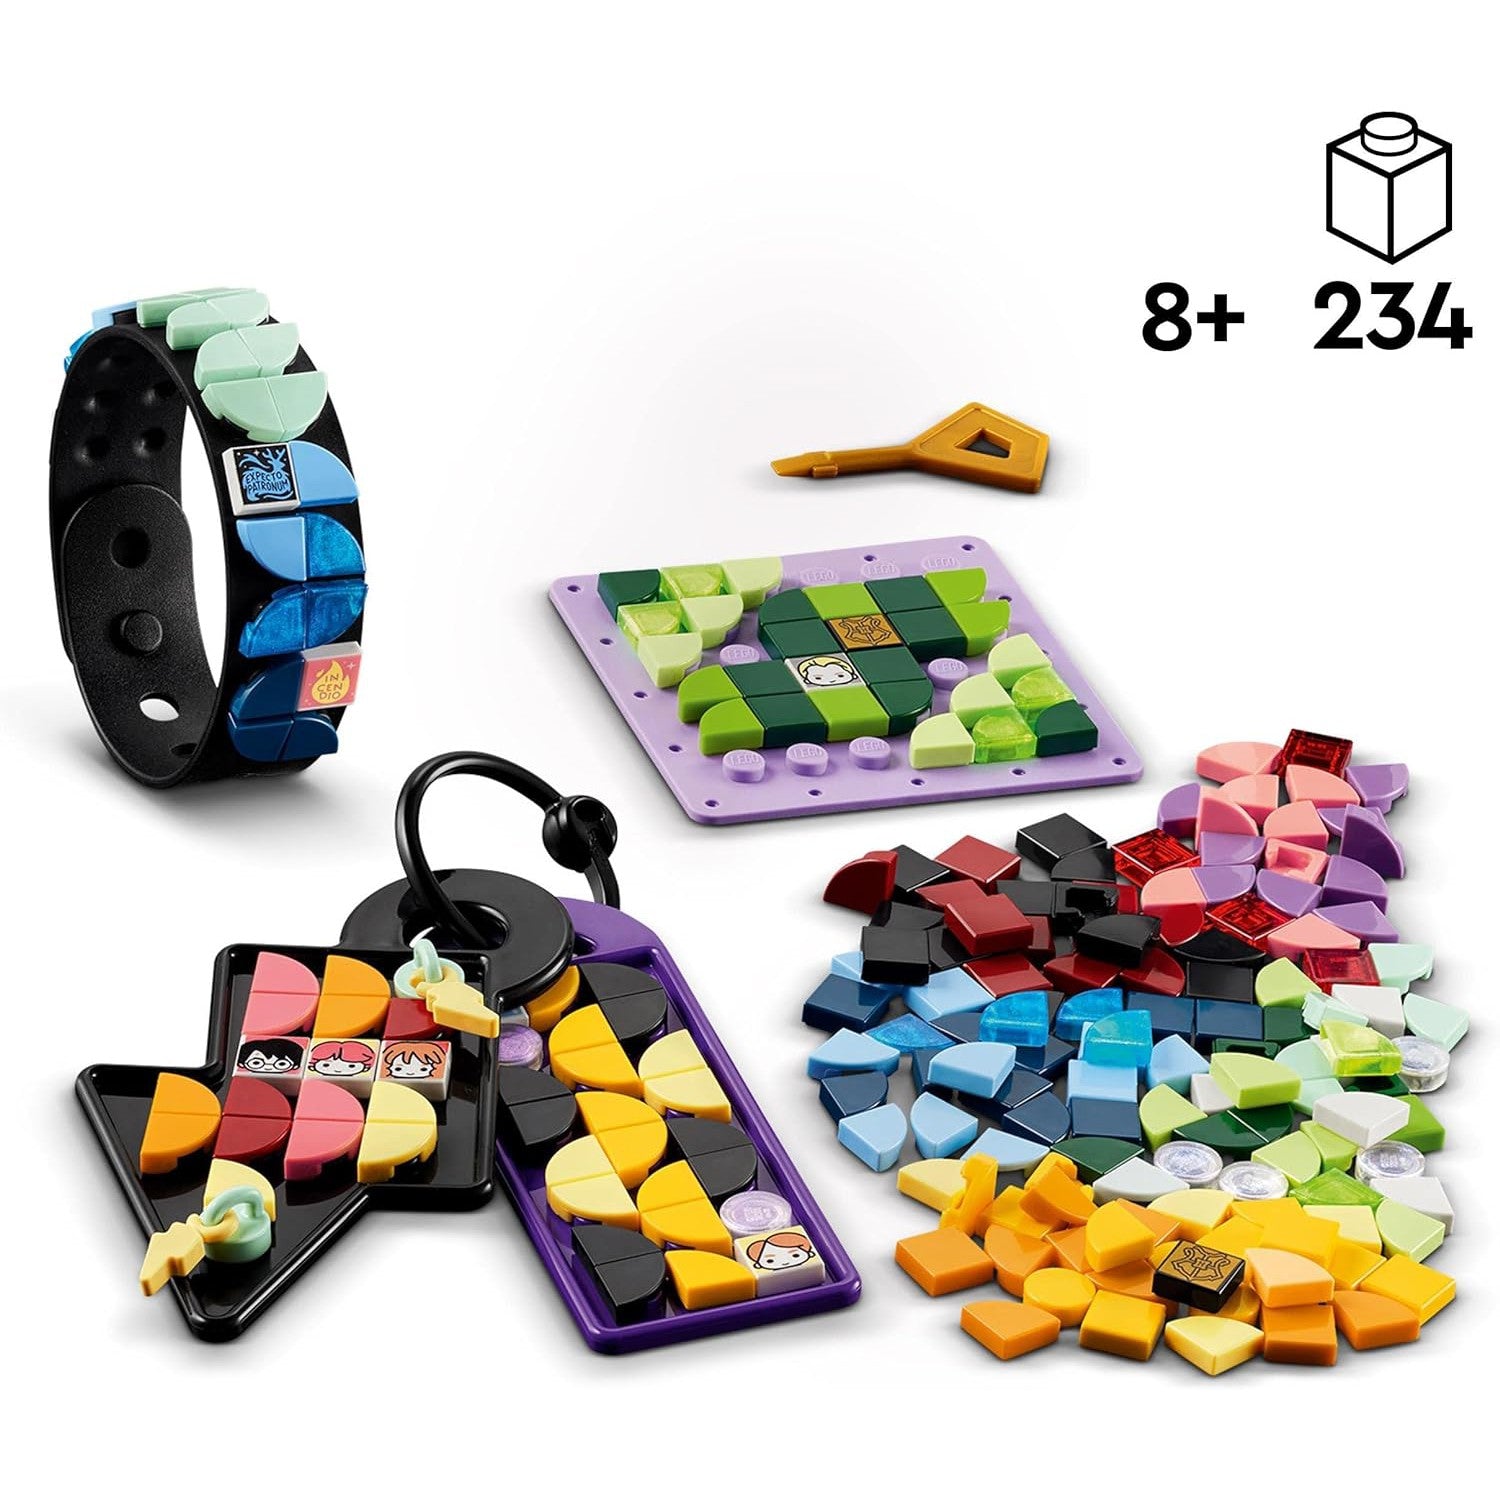 Lego 41808 DOTS Hogwarts Accessories Pack